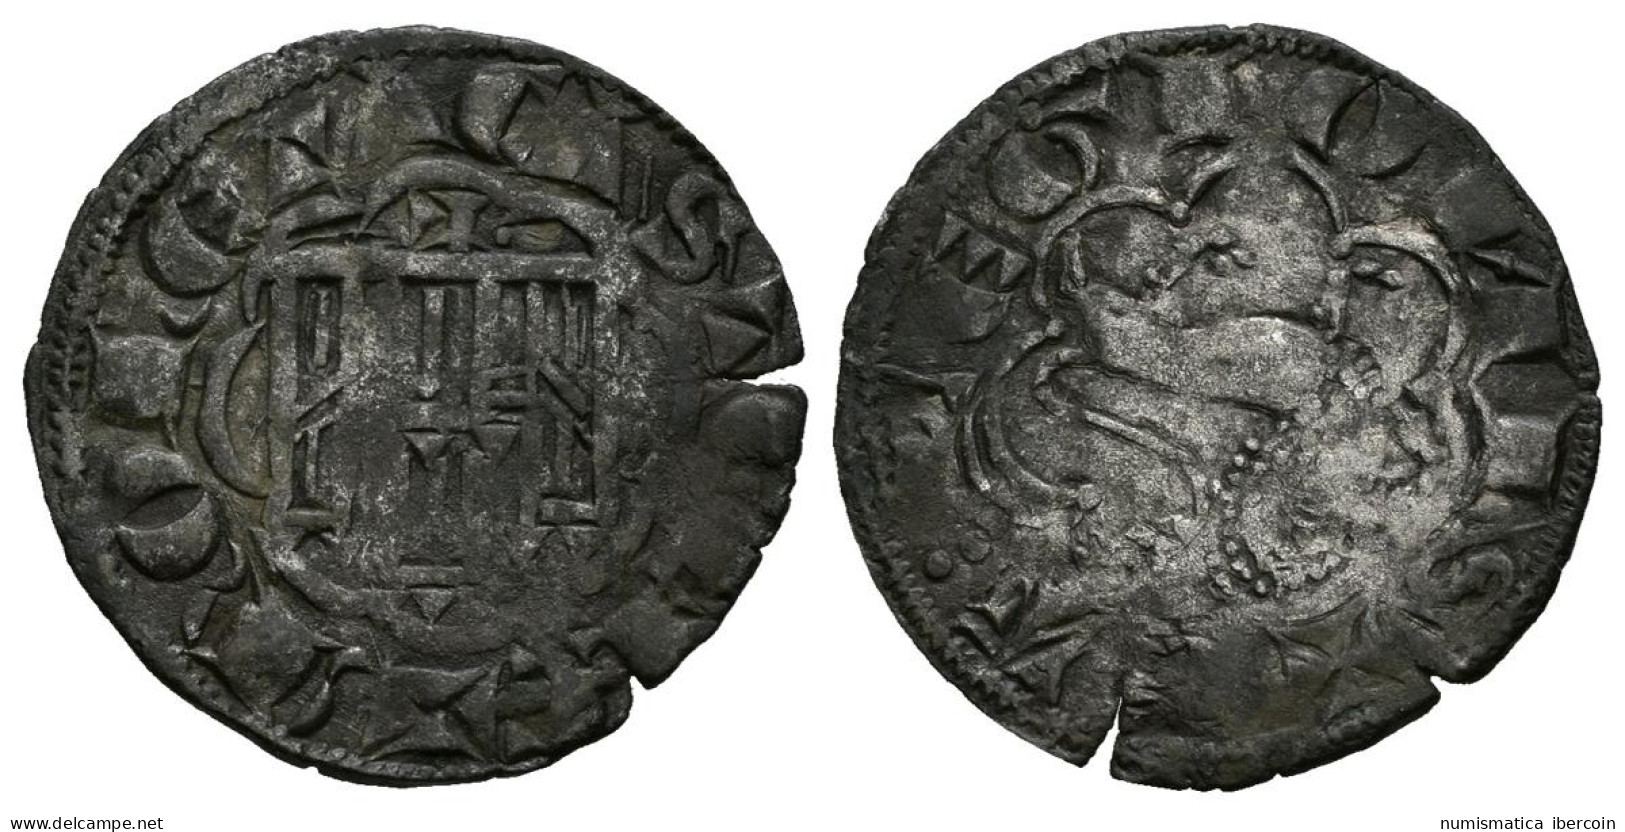 ALFONSO X. Dinero. (1252-1284). León. AB 267. Ve. 0,75g. MBC-. - First Minting